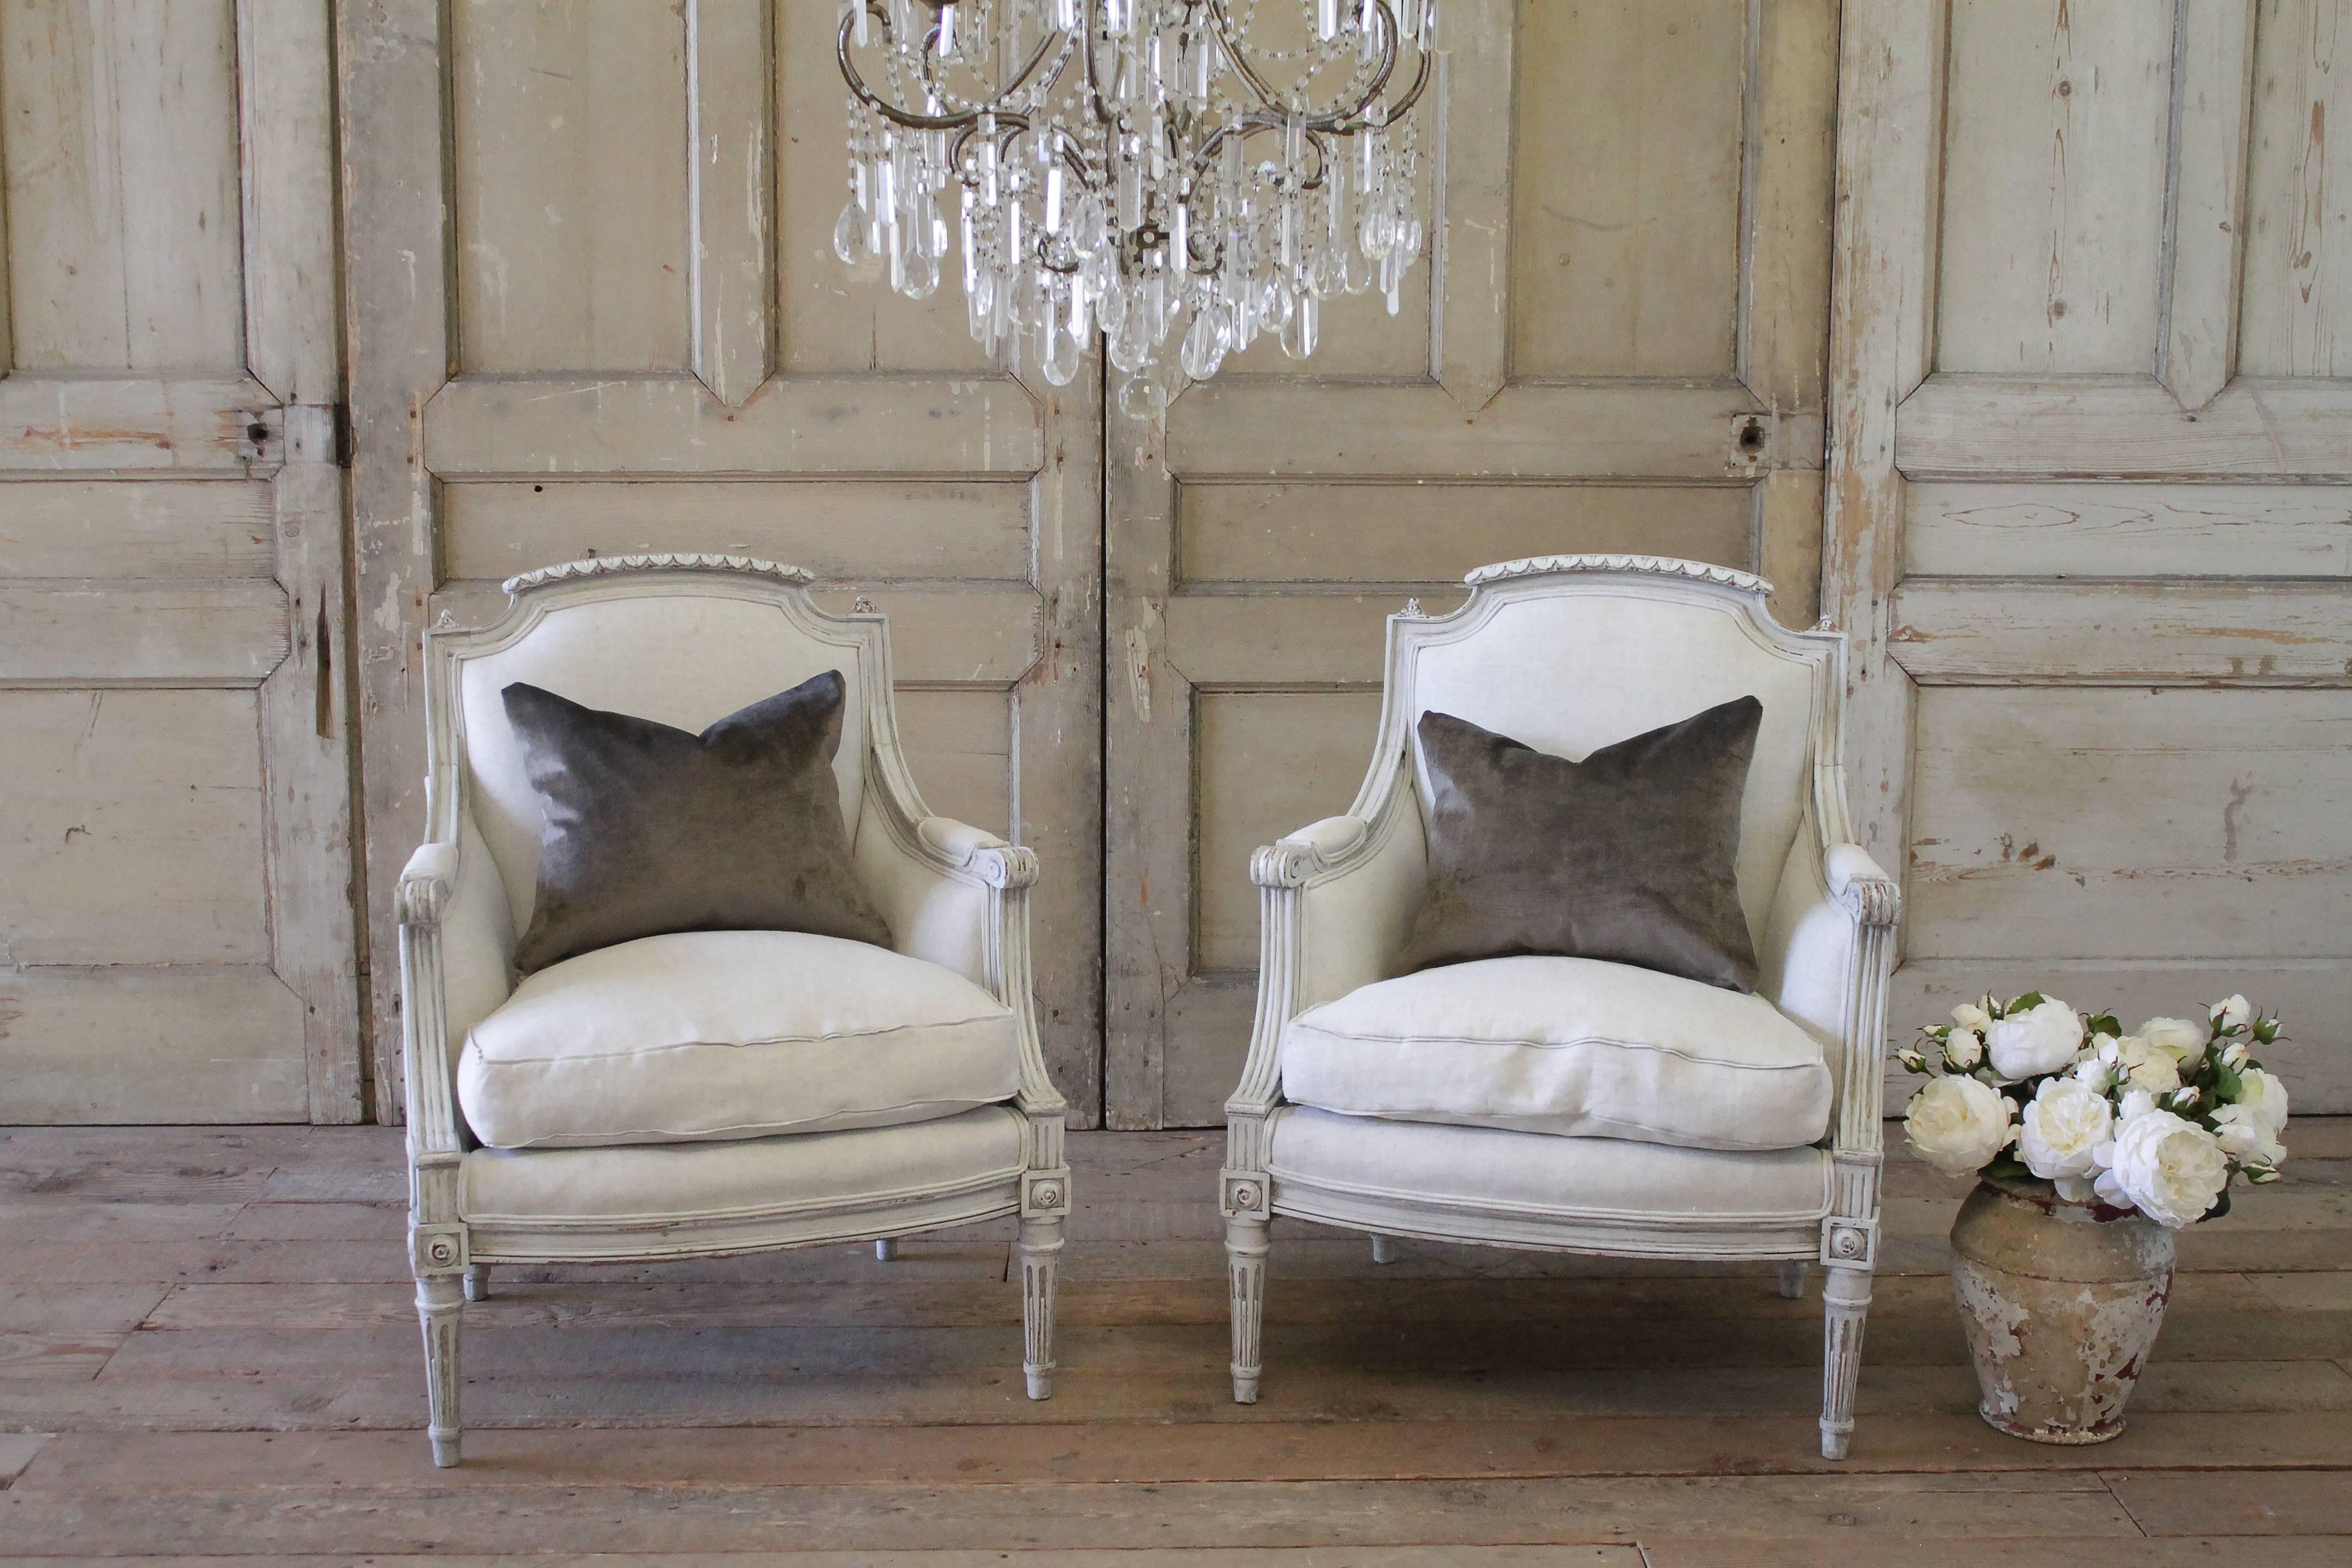 Lovely pair of chairs have been repainted in our signature oyster white finish. We subtly distress the edges and hand glaze the finish to give it an antique patina. Our reupholstery has been done in a light natural Belgian linen, finished with a